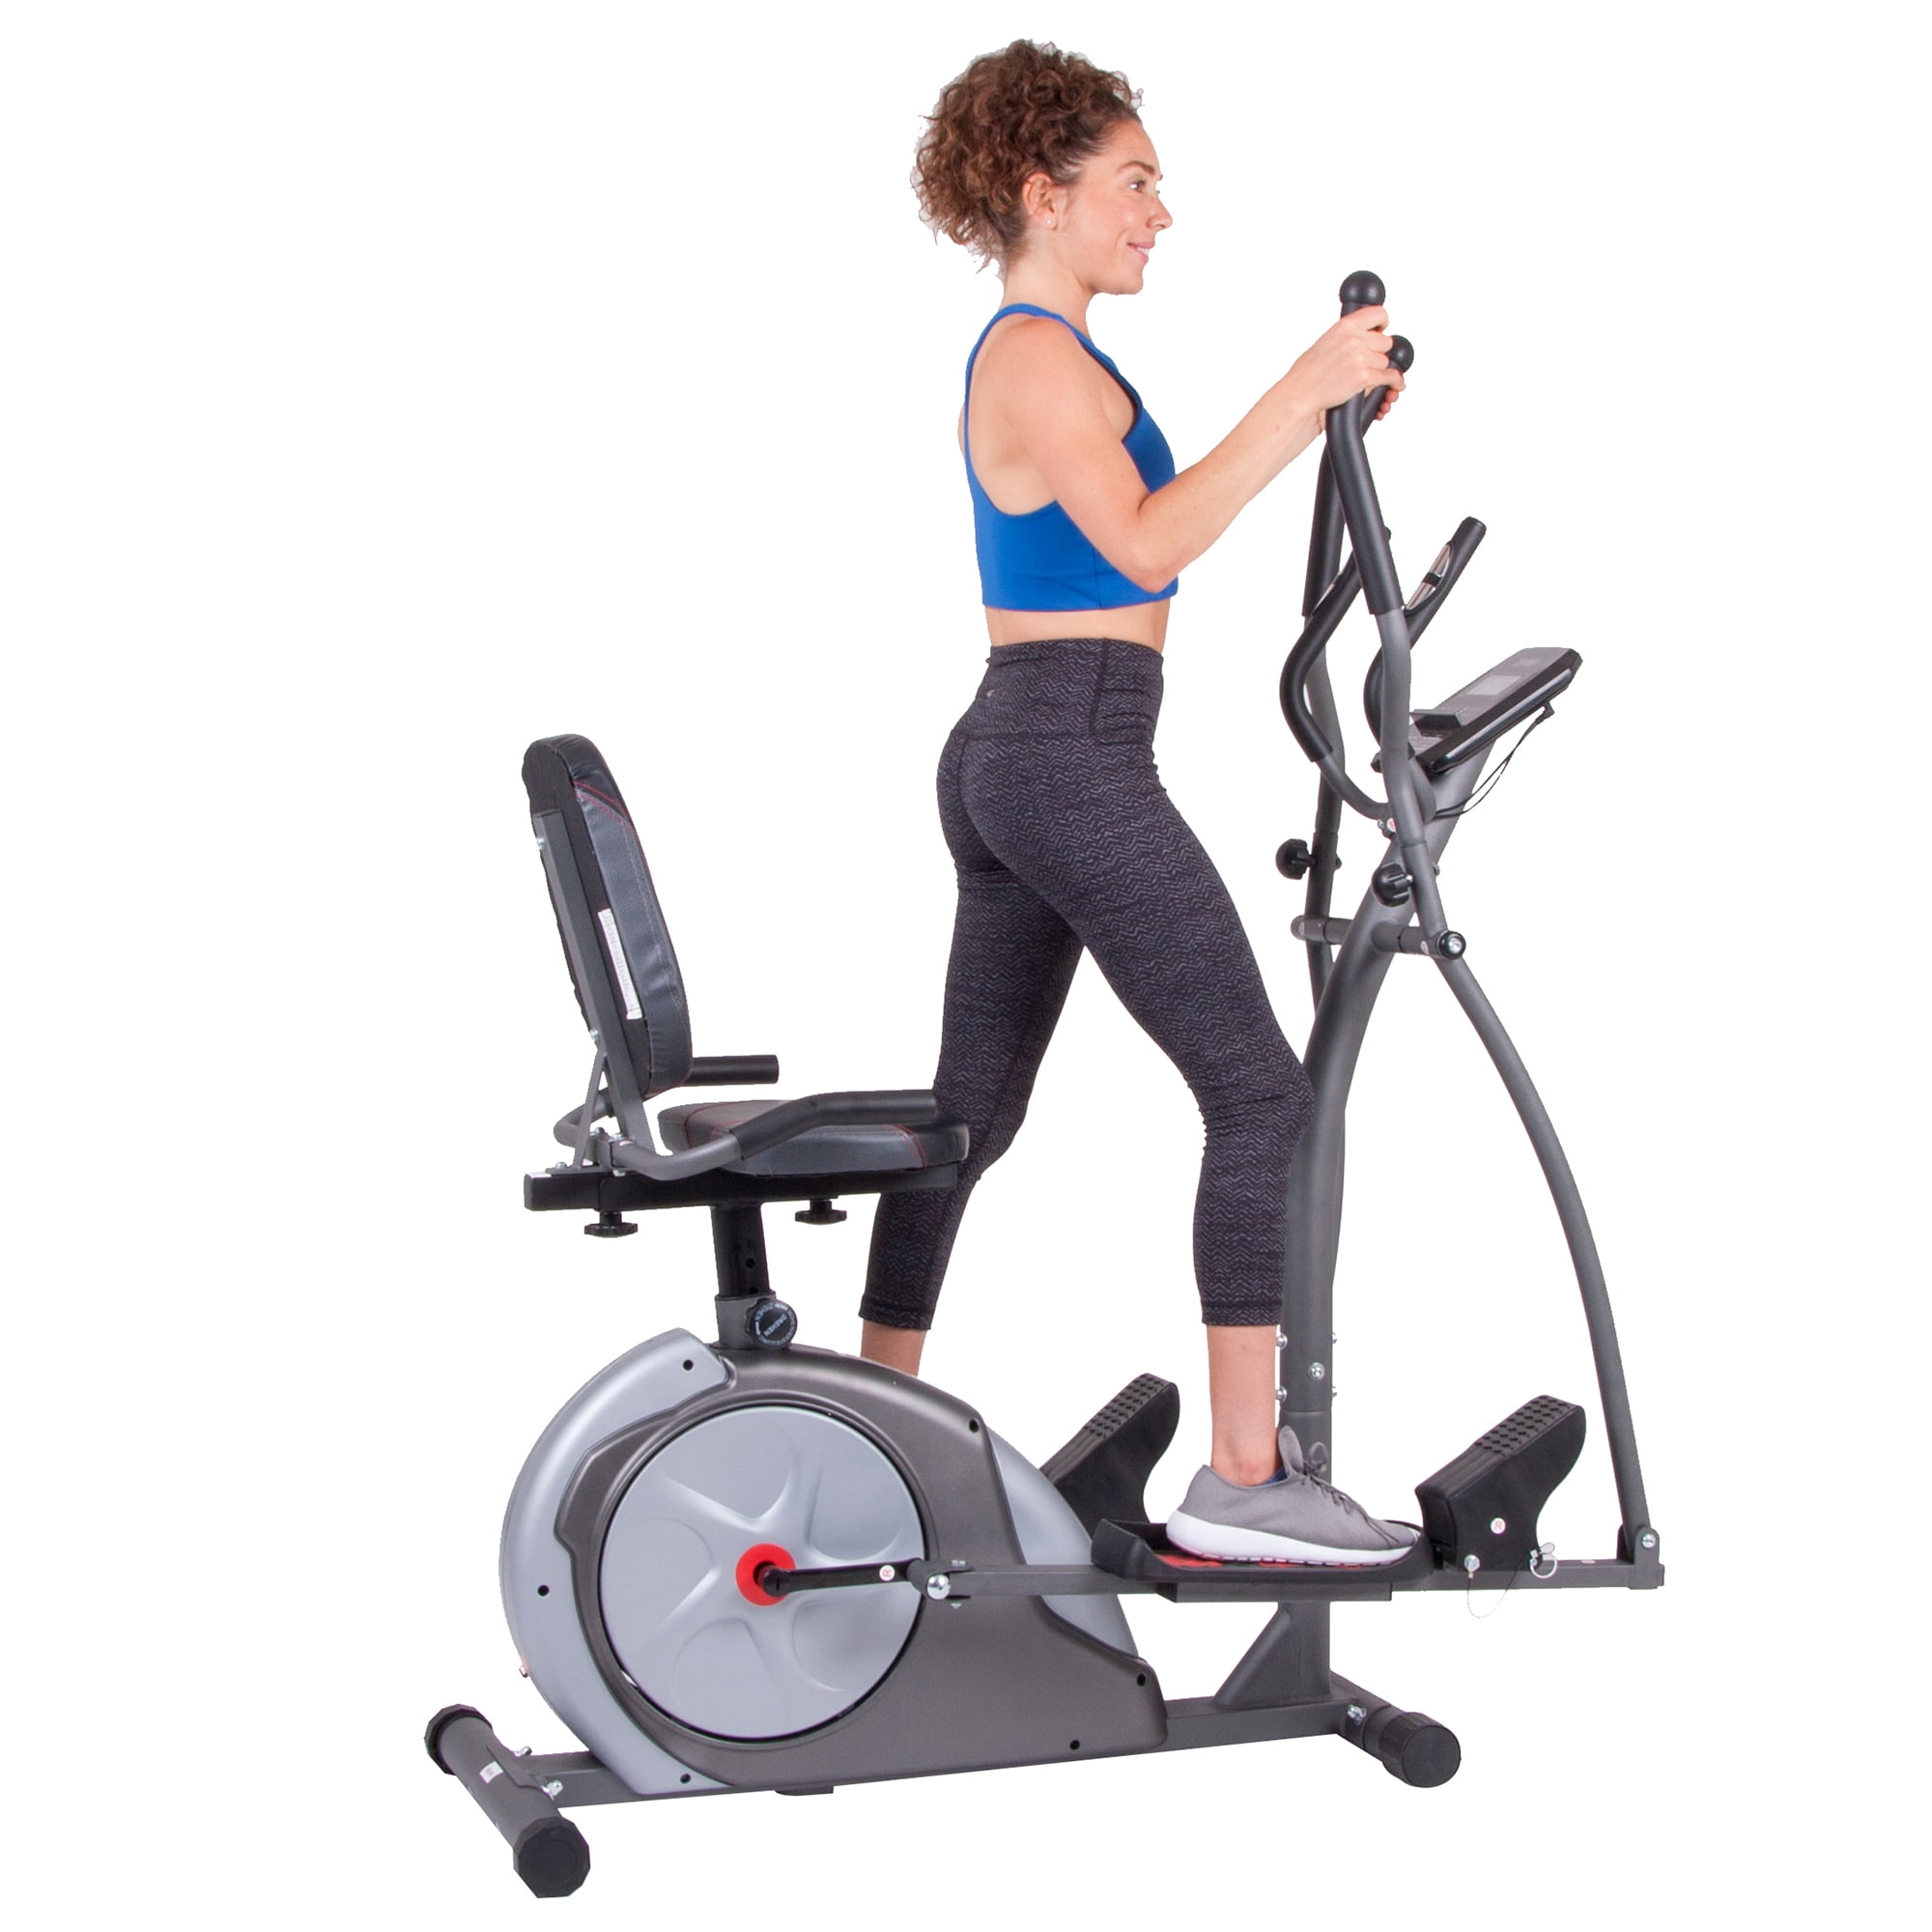 Du Body Rider Elliptical Trainer and Exercise Bike with Seat and Easy Computer 